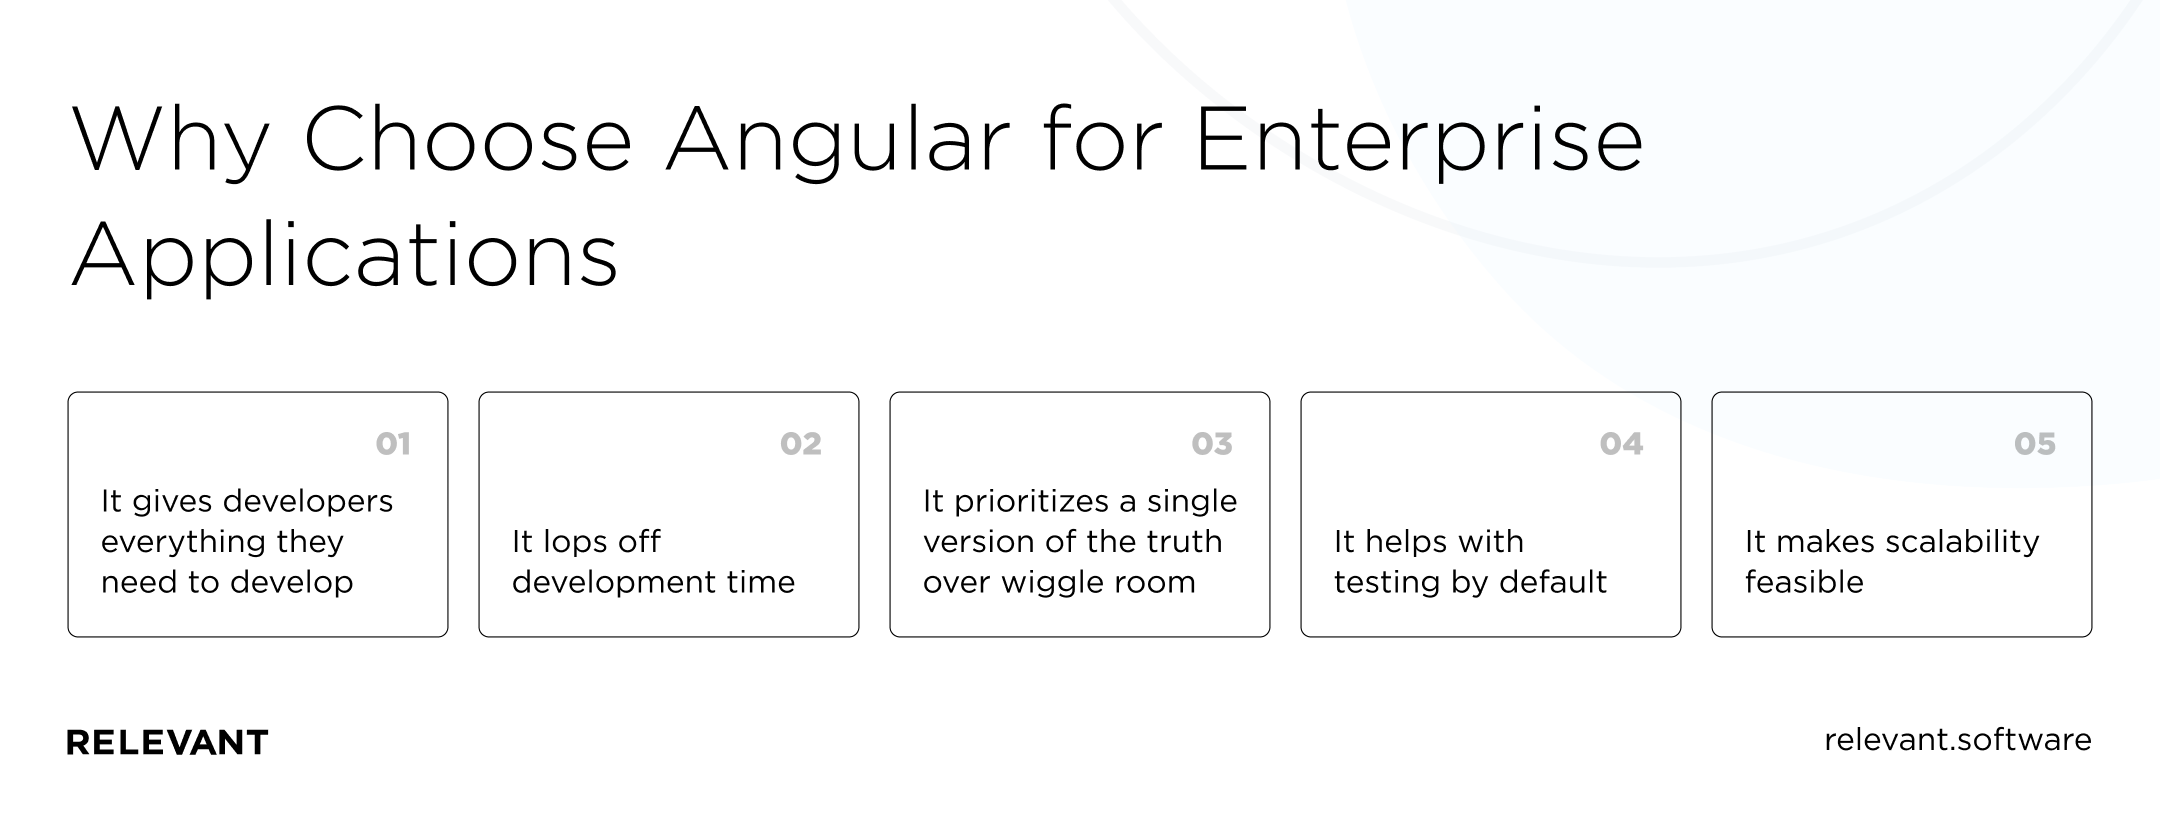 Why Choose Angular for Enterprise Applications